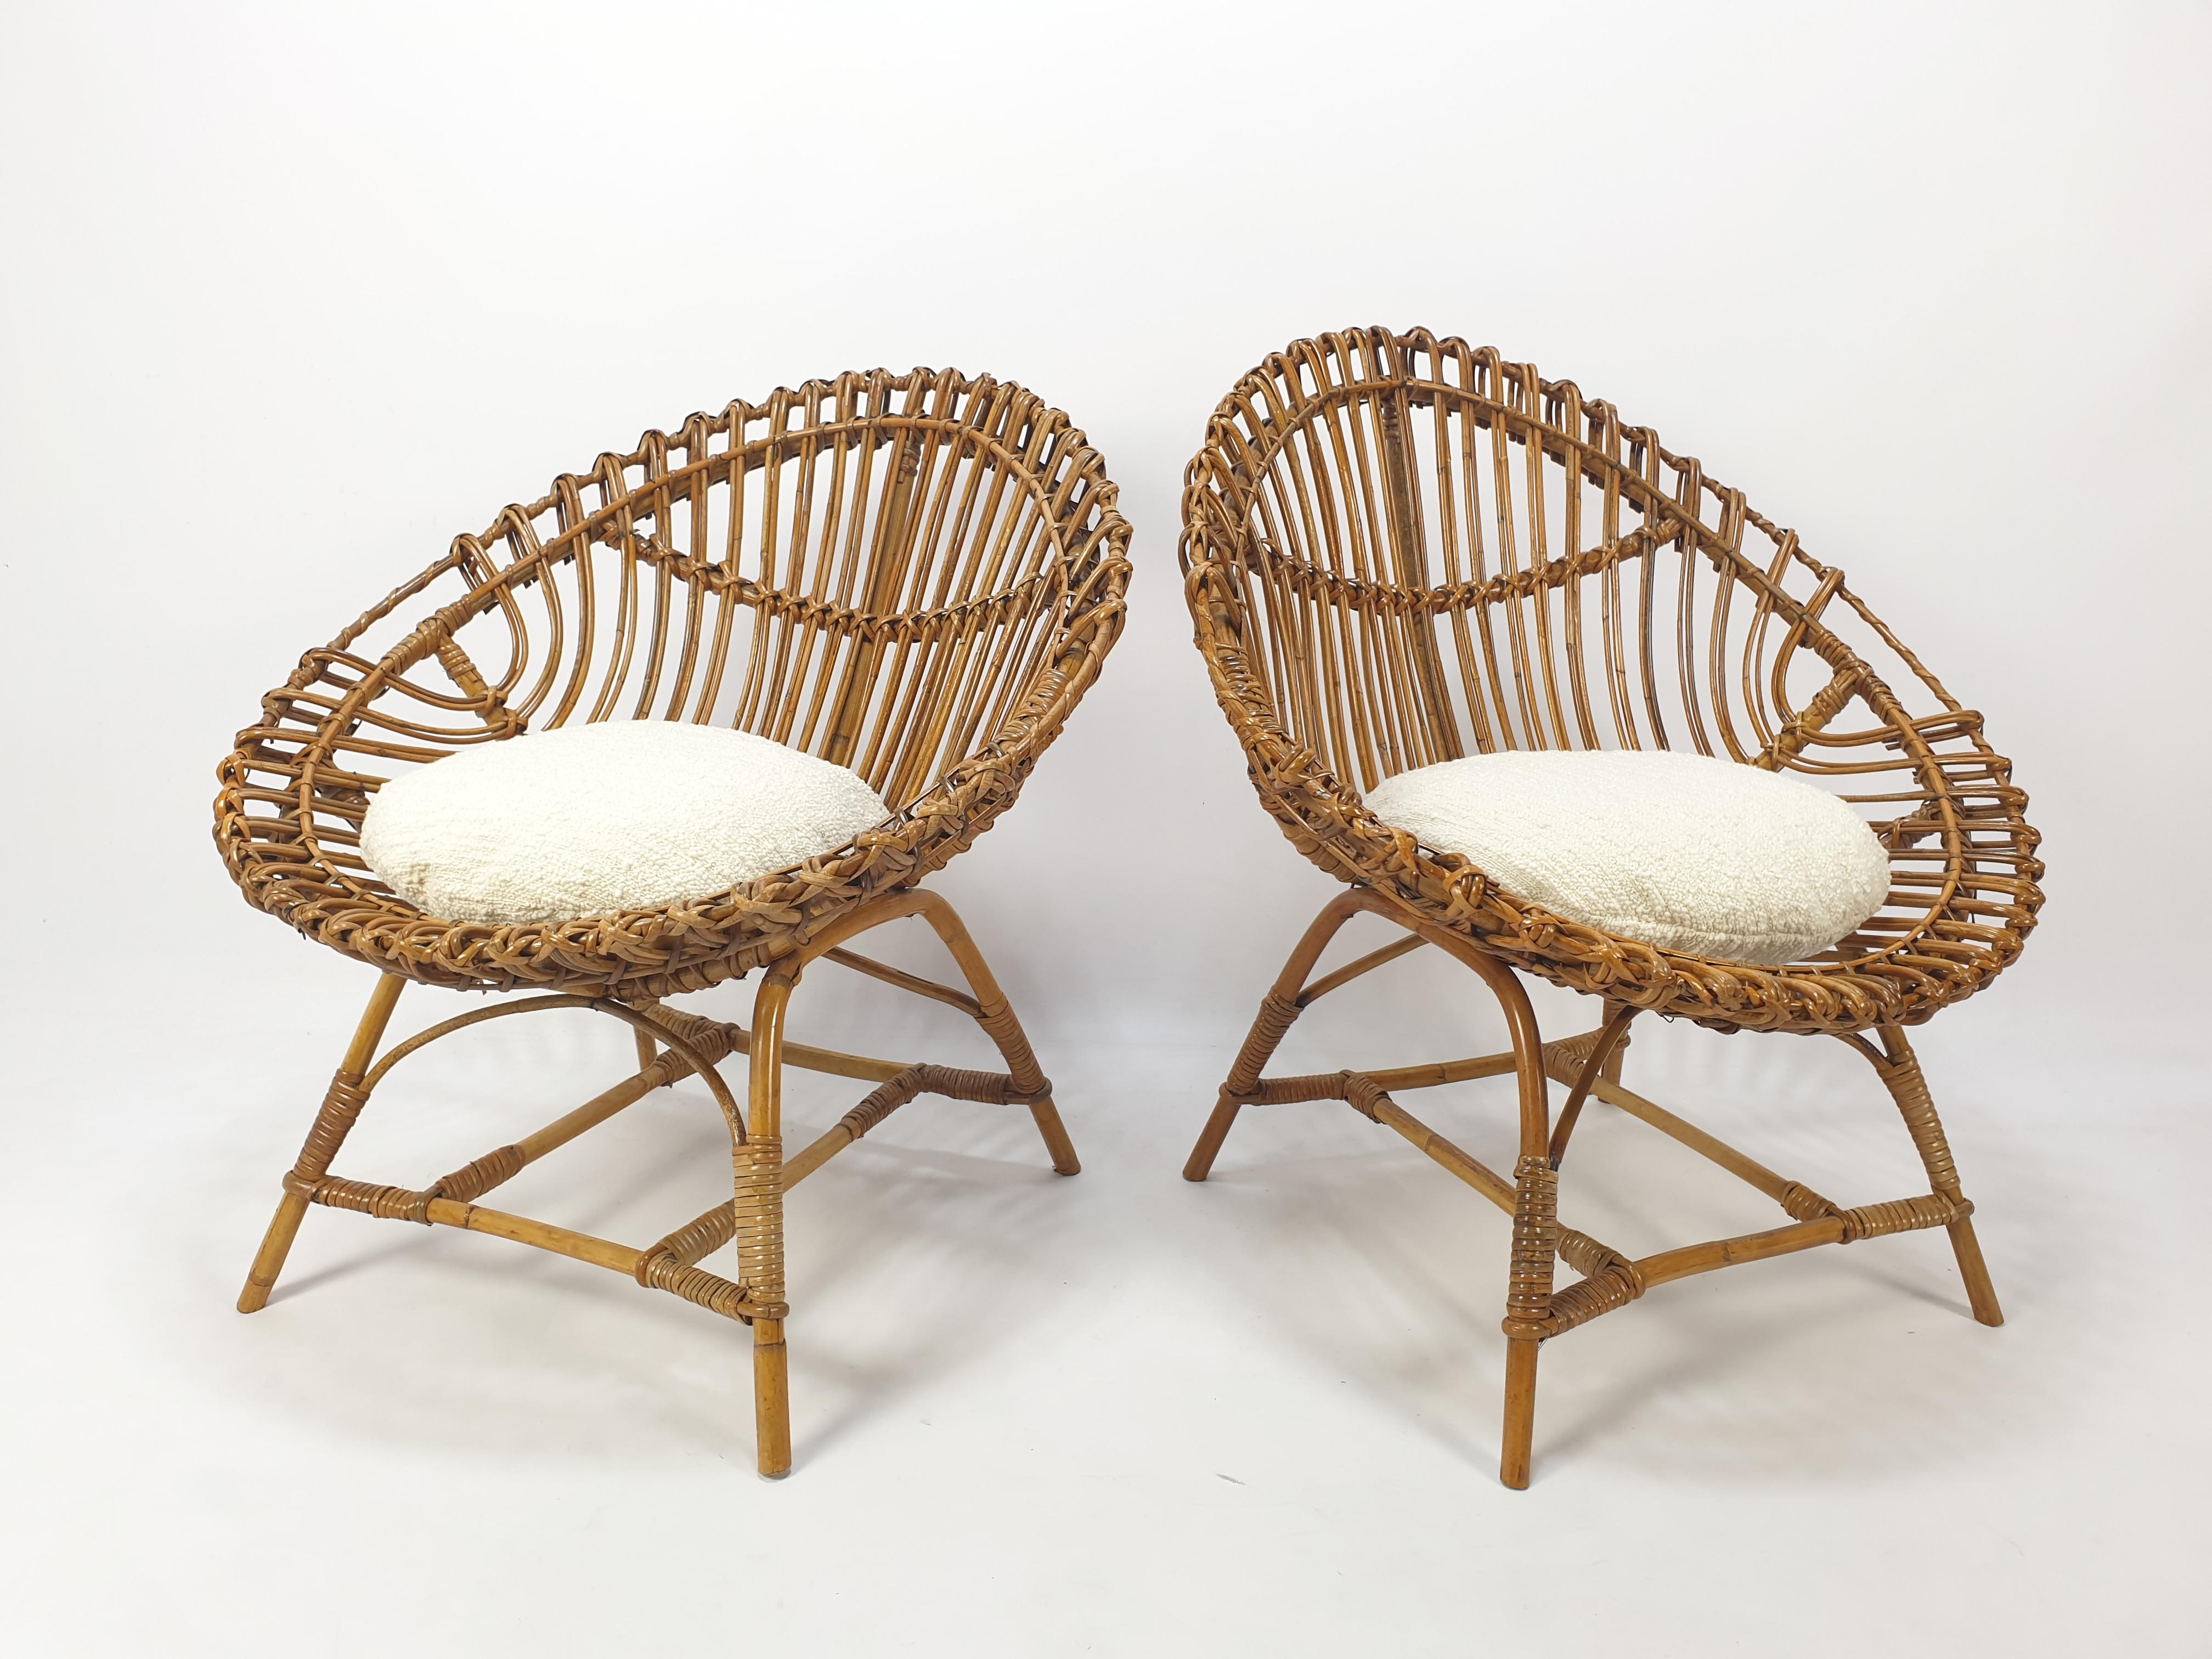 Pair of Italian Midcentury rattan and bamboo lounge chairs in the manner of Franco Albini, 1960's. Very elegant shapes made with the ultimate handcraft. The new cushions are upholstered with lovely Dedar fabric (Italy). The set is in very good